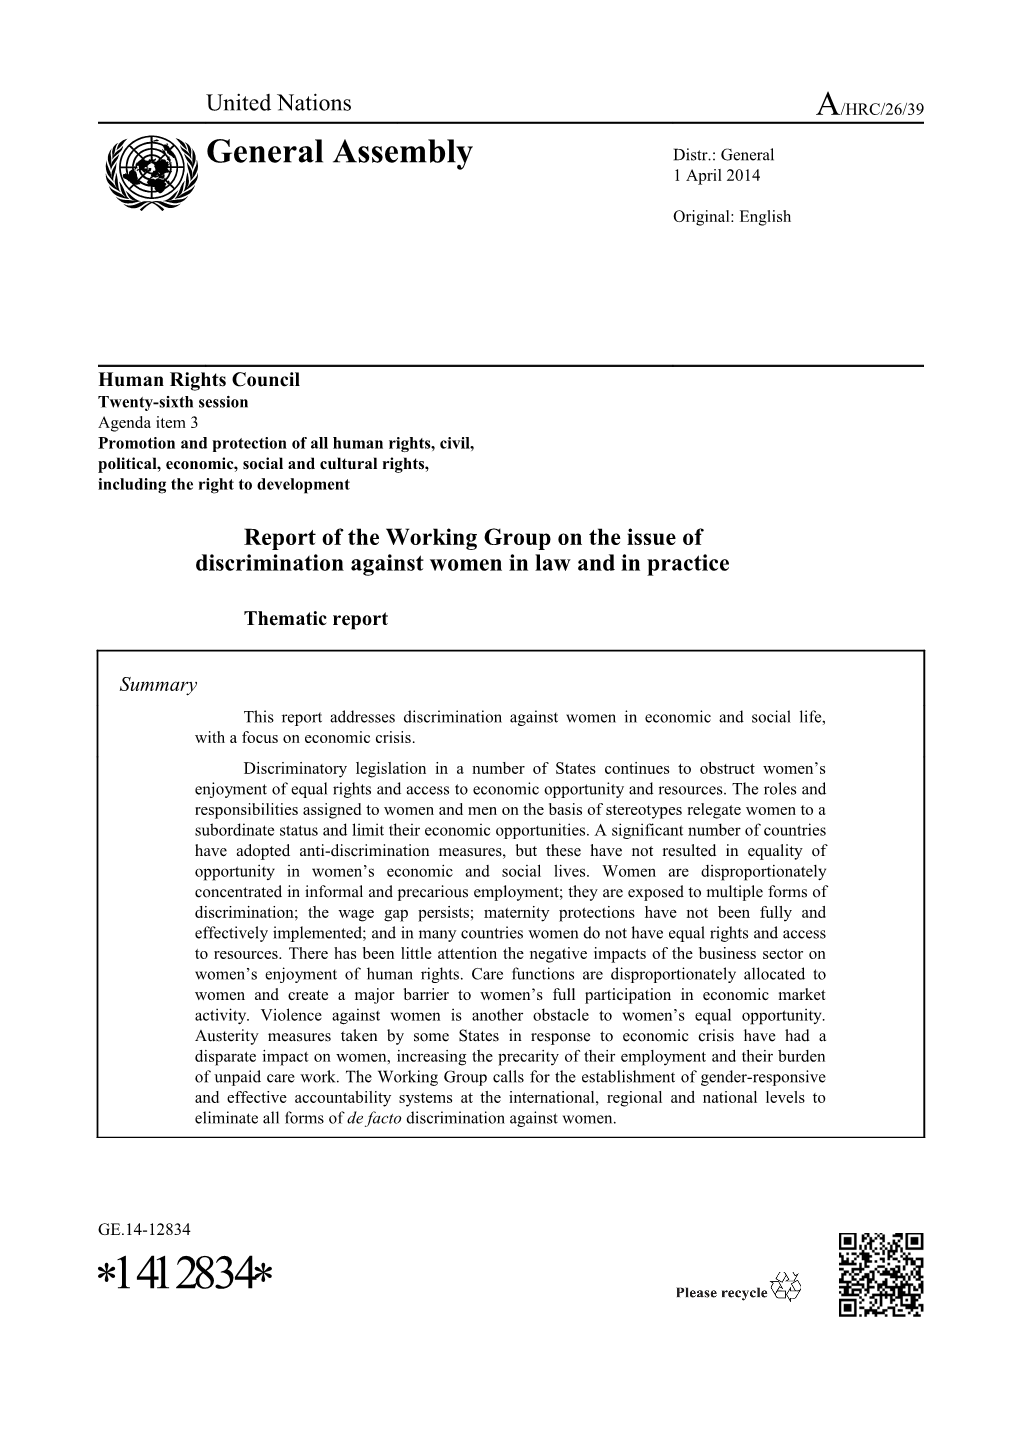 Report of the Working Group on the Issue of Discrimination Against Women in Law and In